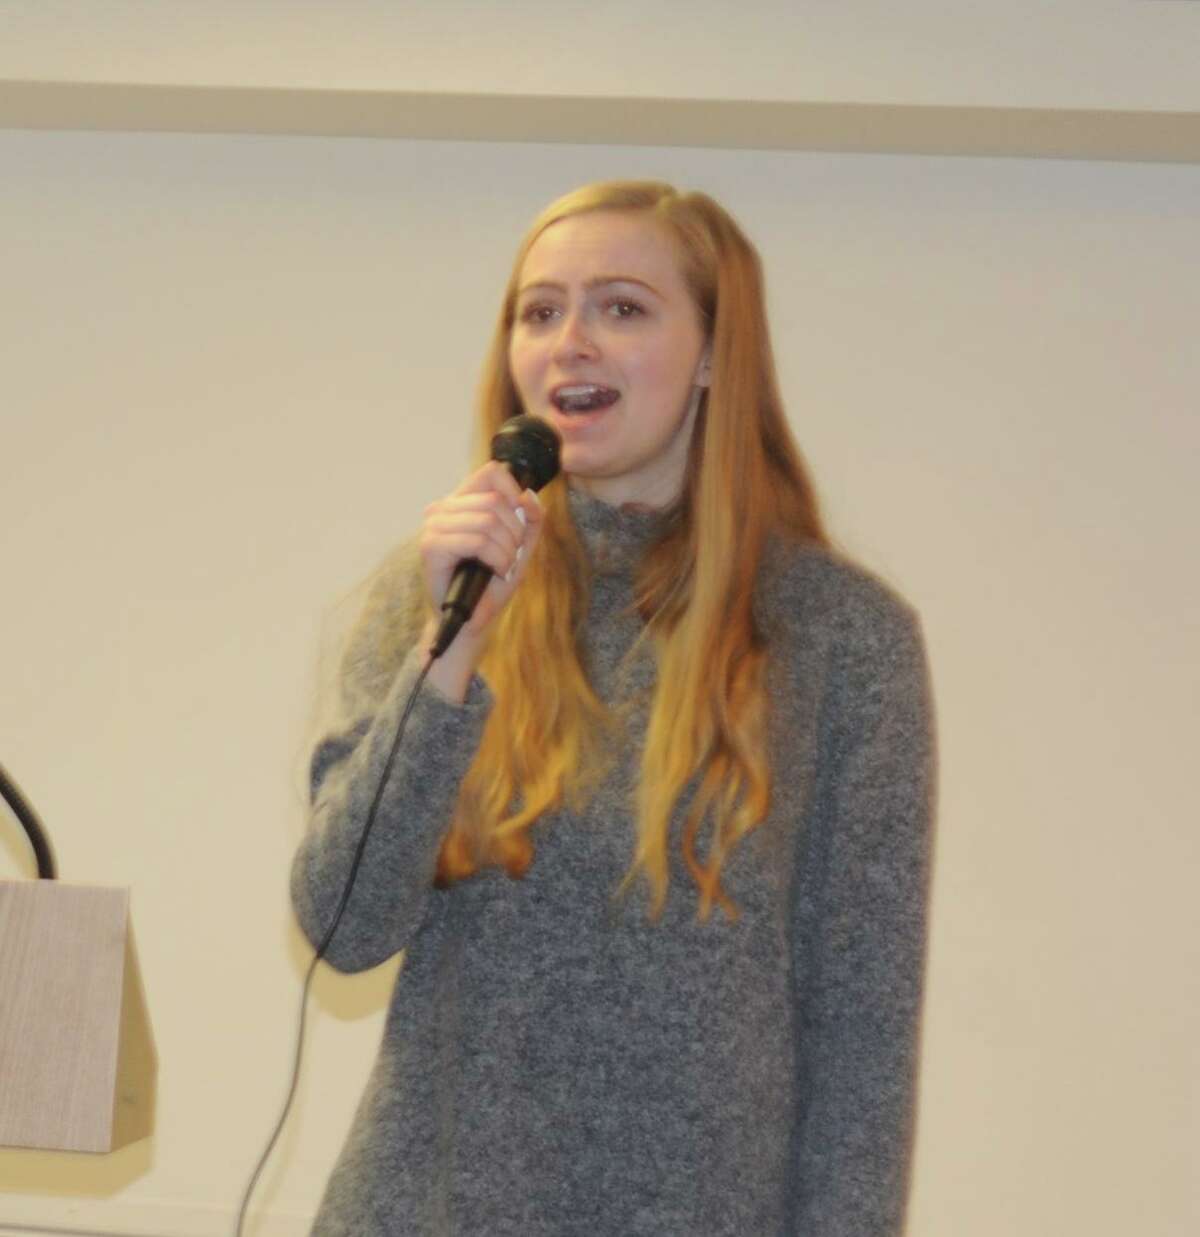 Madelyn Aug, who lives in Sandy Hook and goes to WestConn, sang 'Rise Up' at Ridgefield's Sandy Hook remembrance observances on Saturday, Dec. 14, the seventh anniversary of 2012 shooting at Sandy Hook Elementary School in Newtown.